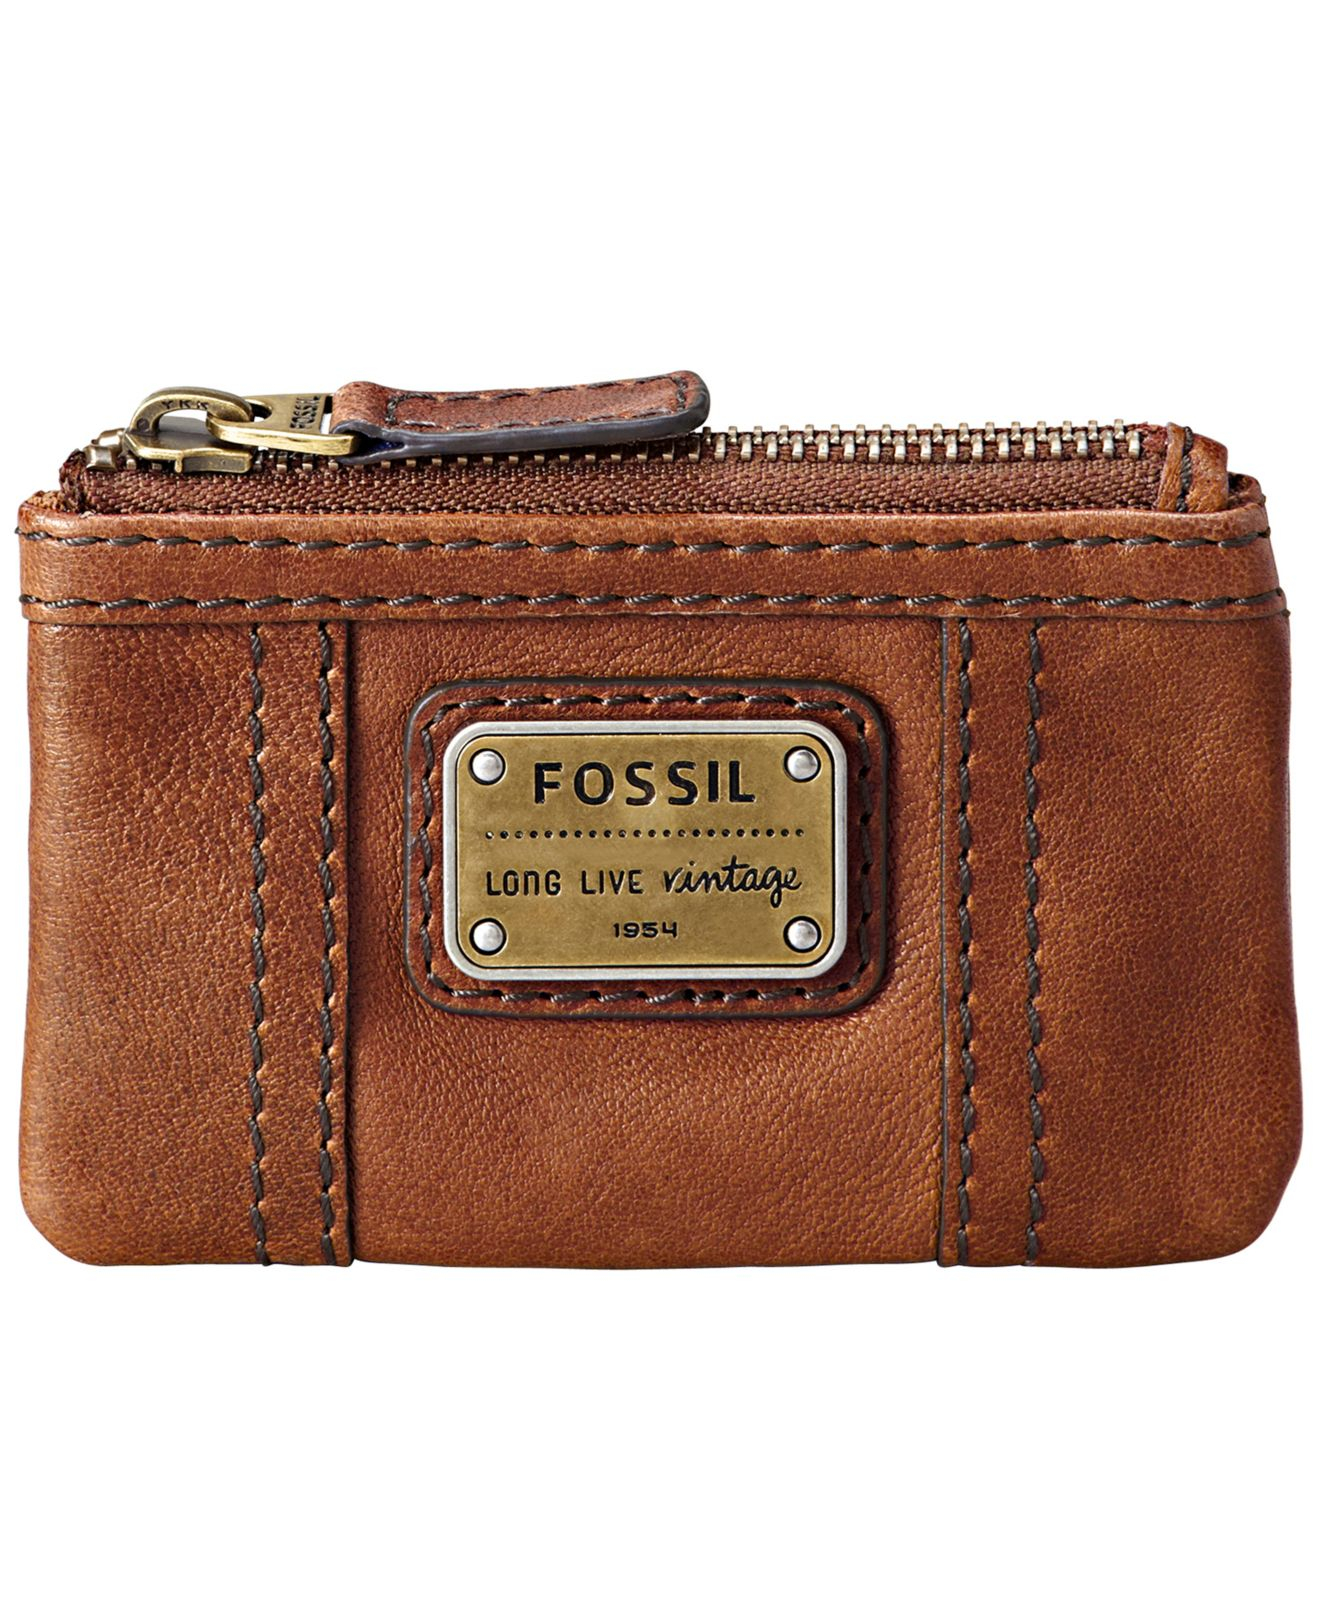 FOSSIL Brand Gold change purse - clothing & accessories - by owner -  apparel sale - craigslist